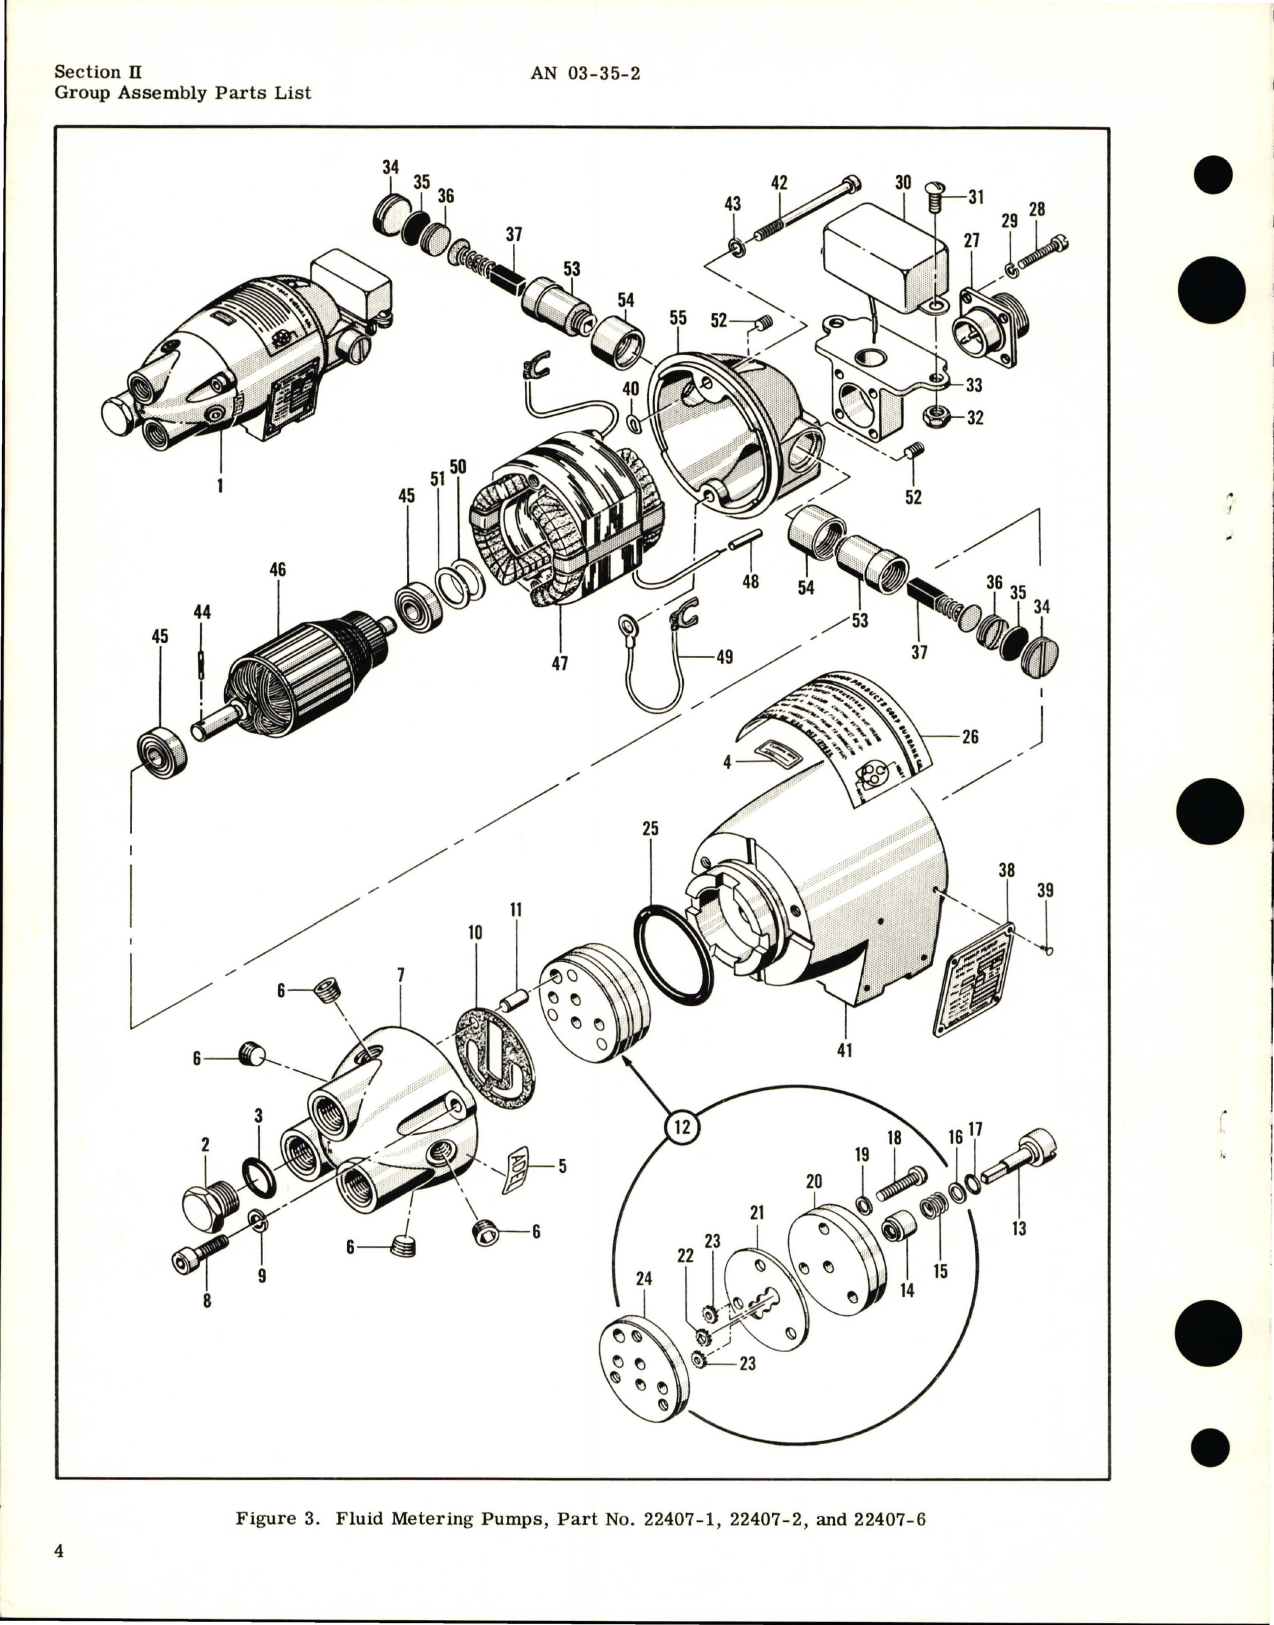 Sample page 6 from AirCorps Library document: Illustrated Parts Breakdown for Fluid Metering Pumps - Part 22407-1, 22407-2, and 22407-6 